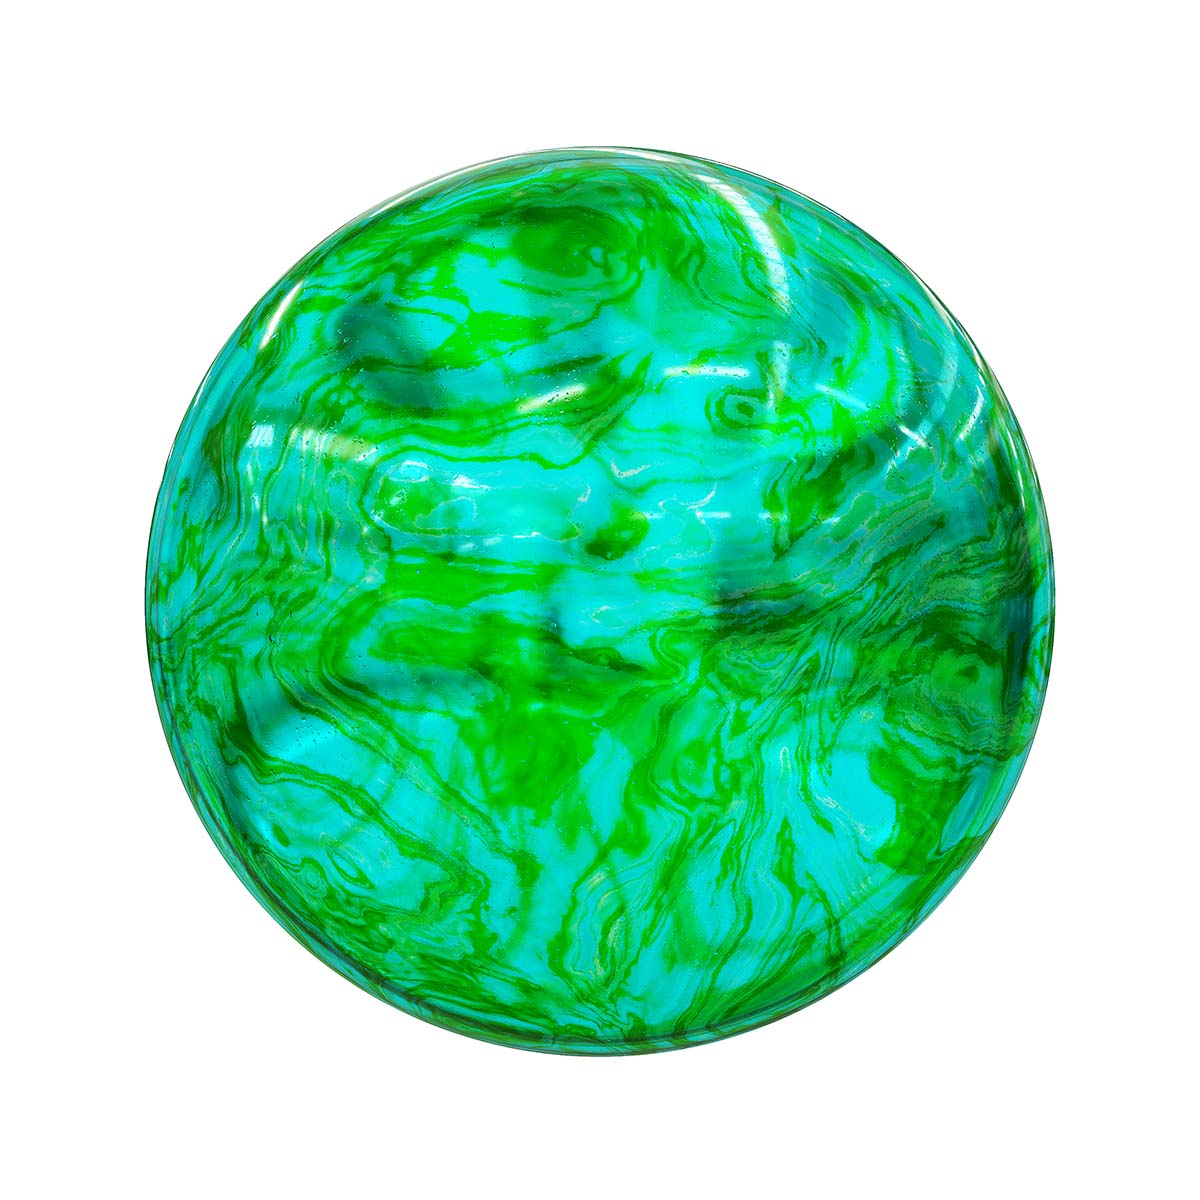 Green Stained Glass PBR Texture